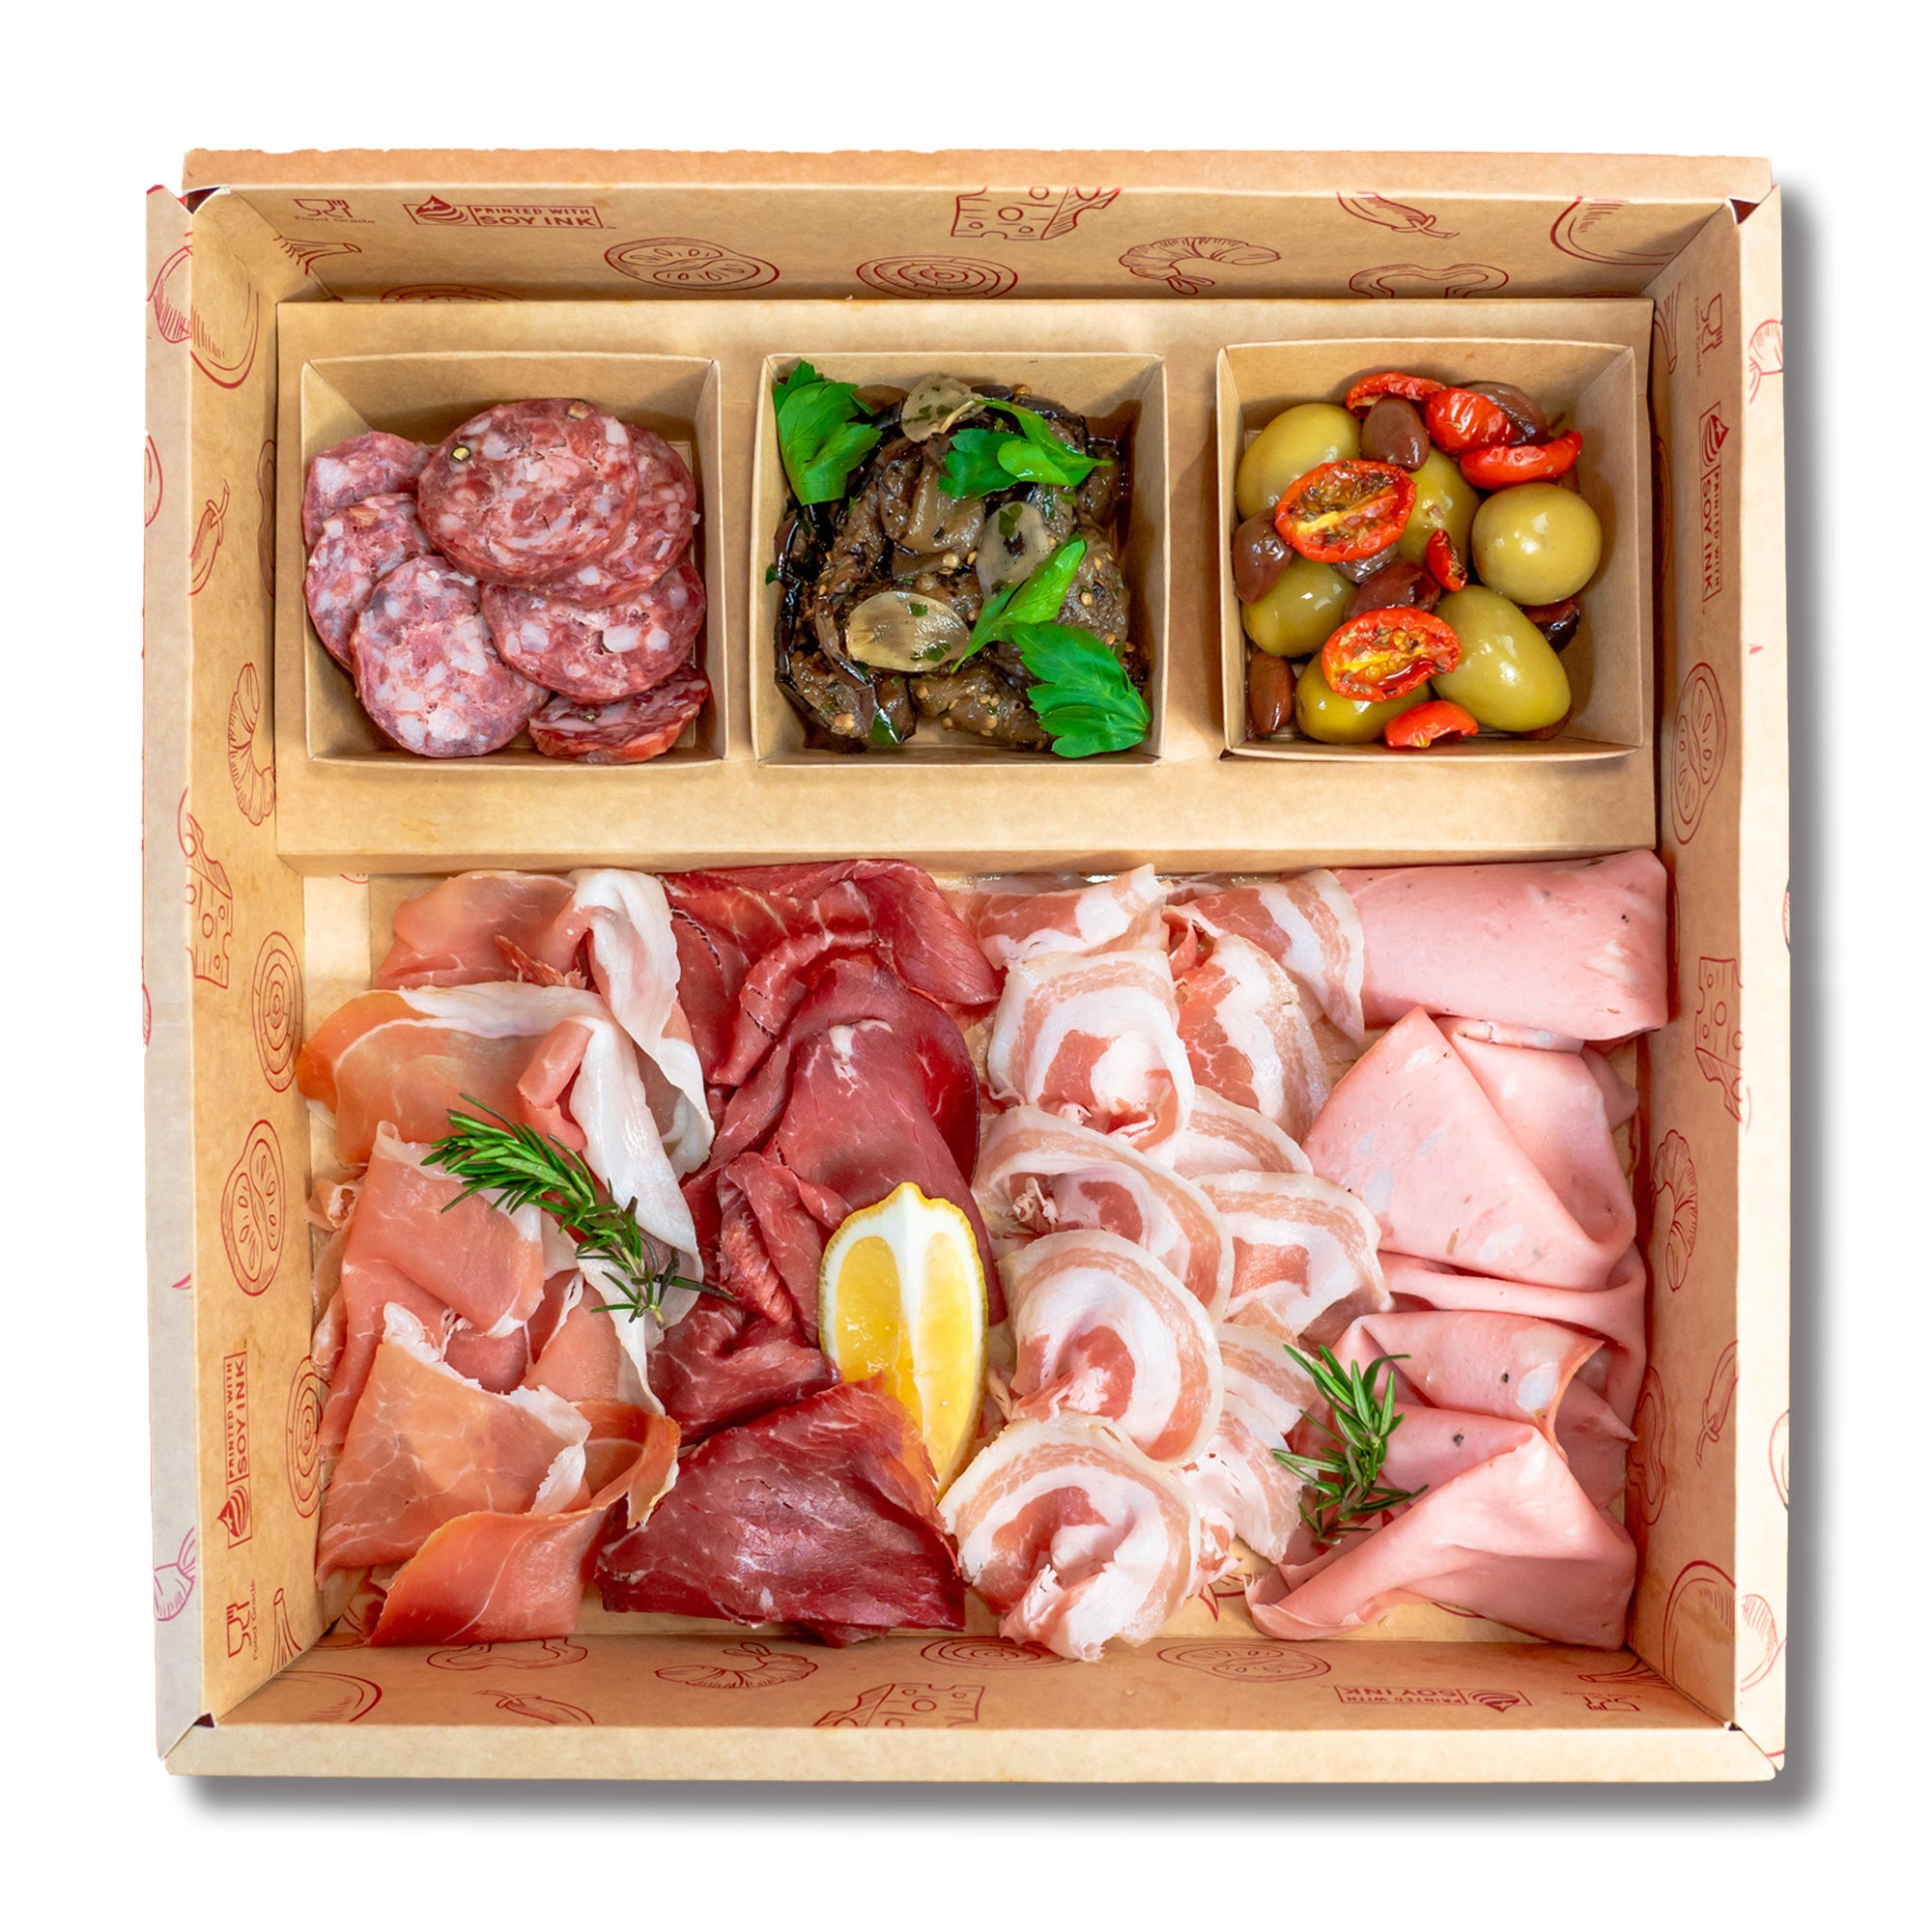 These cold cuts boxes allow you to enjoy your delicious cold cuts longer.